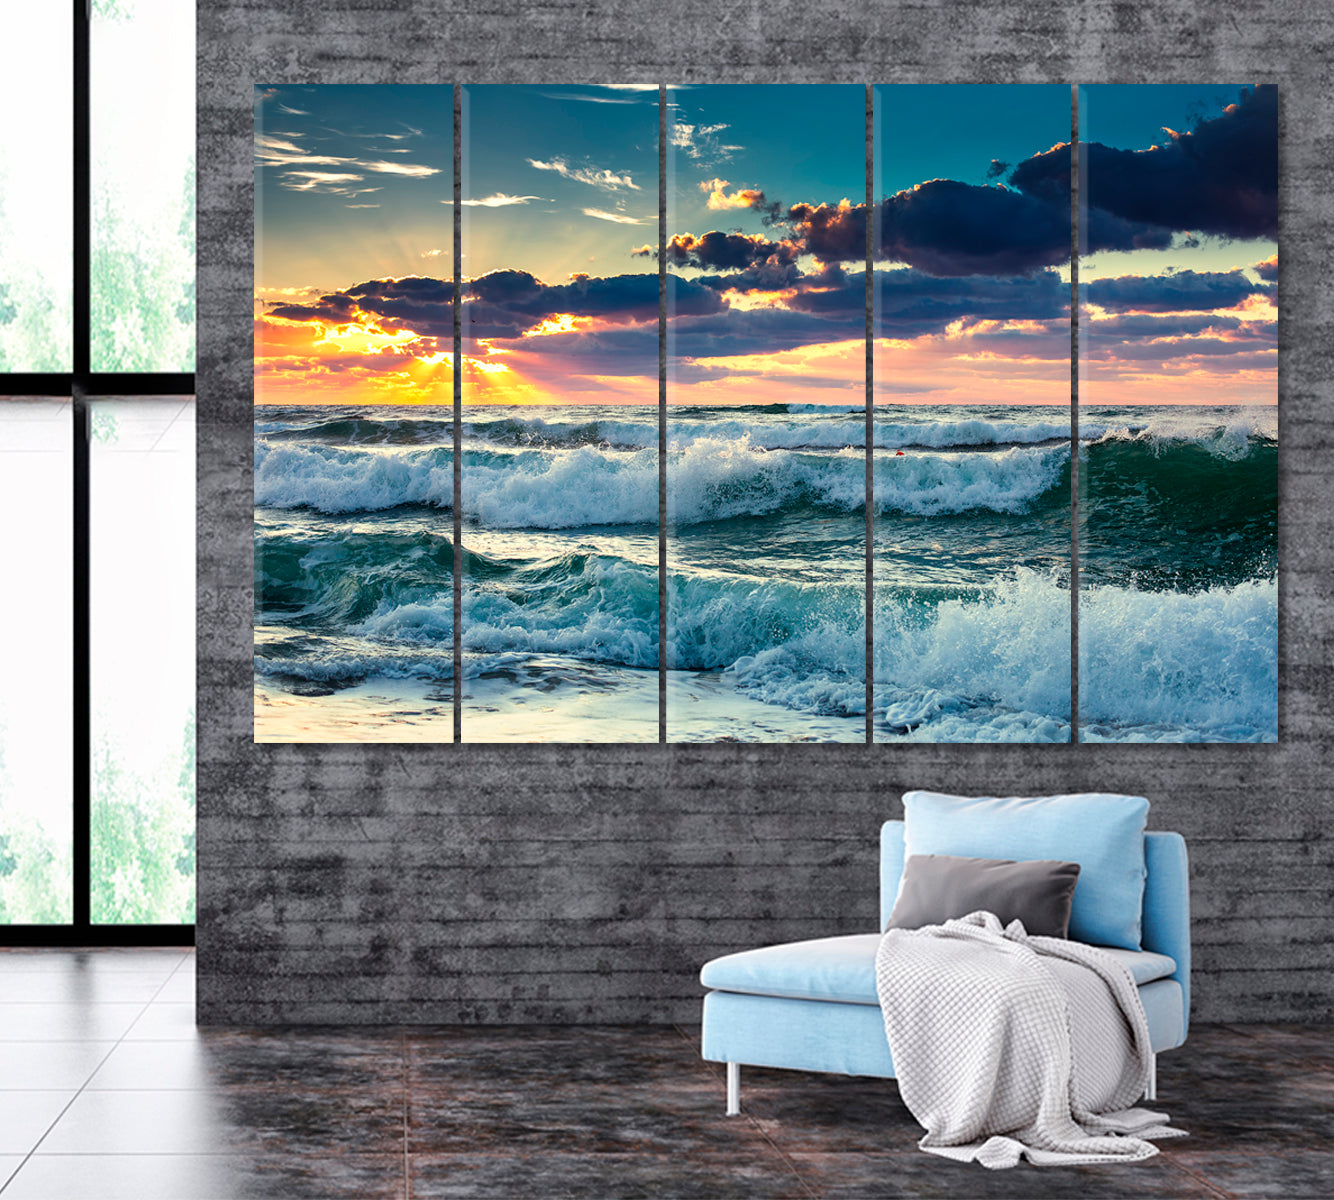 Ocean Waves Landscape with Dramatic Clouds Canvas Print ArtLexy 5 Panels 36"x24" inches 